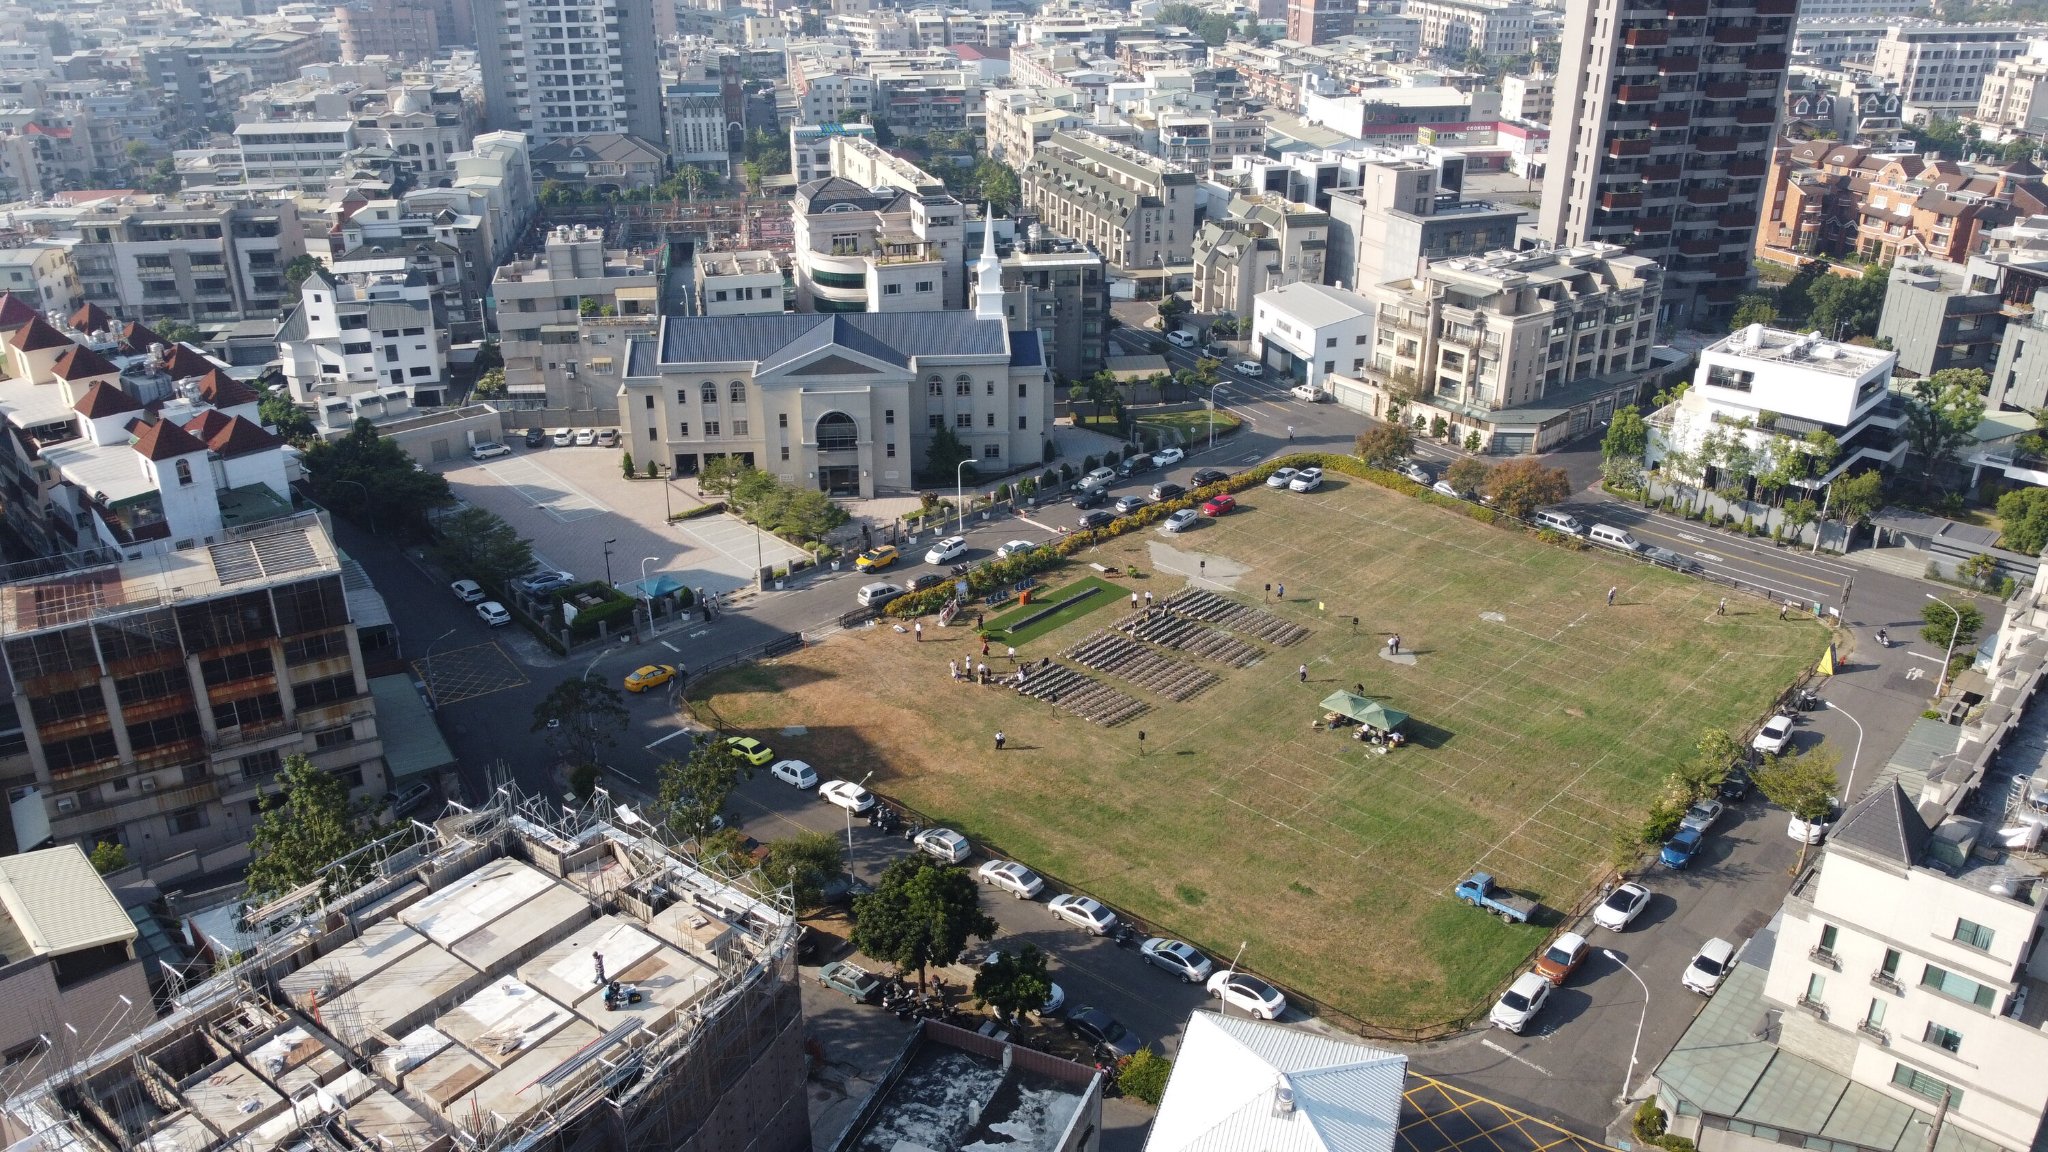 An aerial view of a grass field with buildings around it.